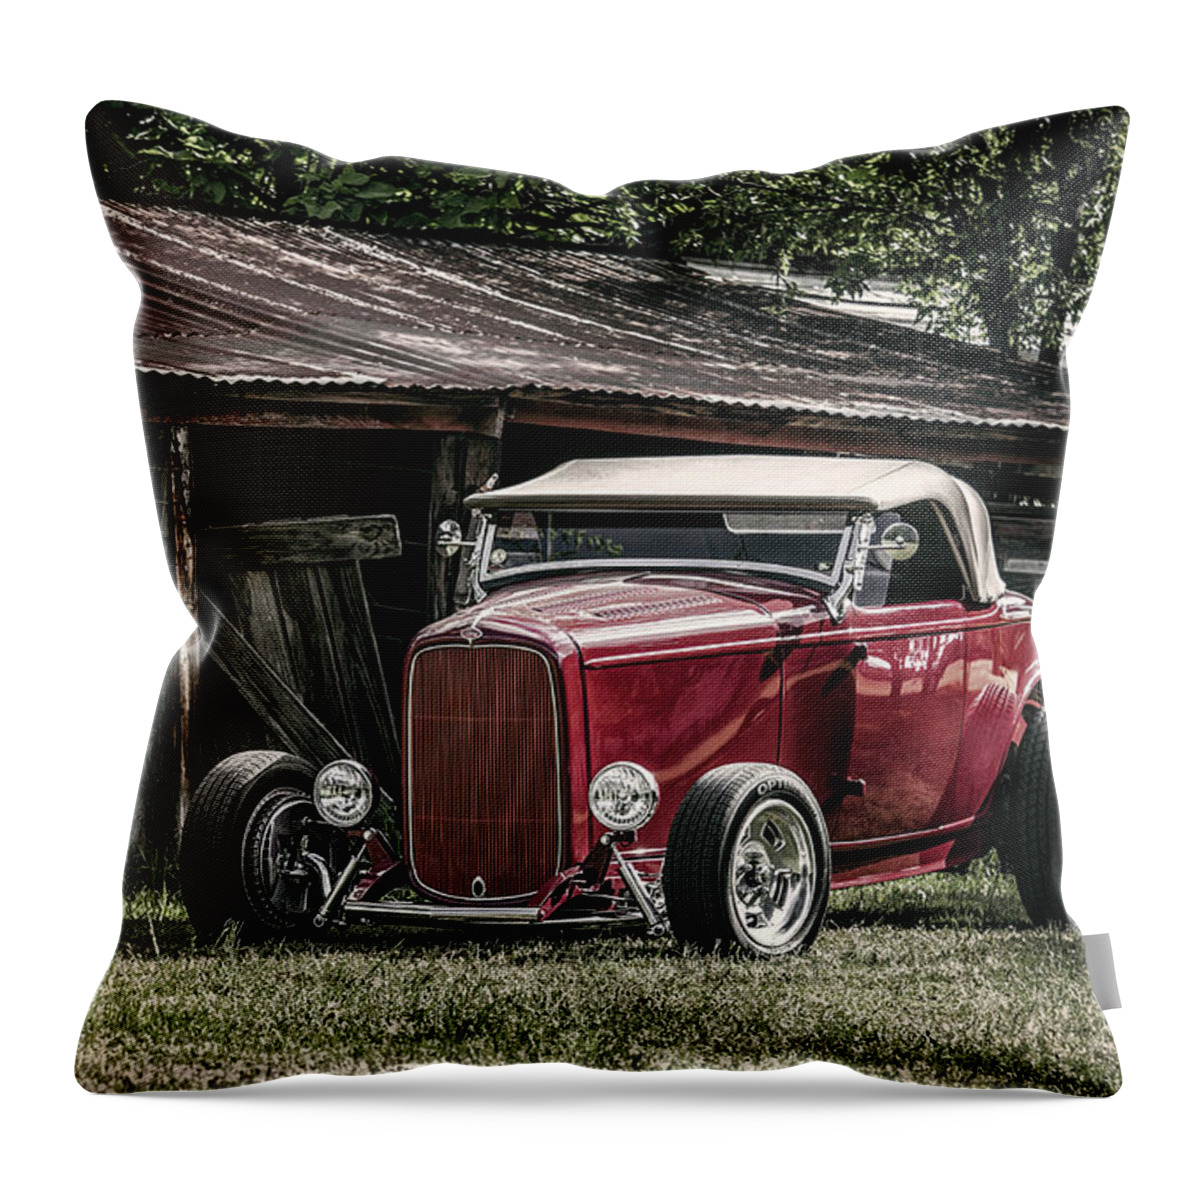 Vintage Throw Pillow featuring the digital art Barn Find by Douglas Pittman